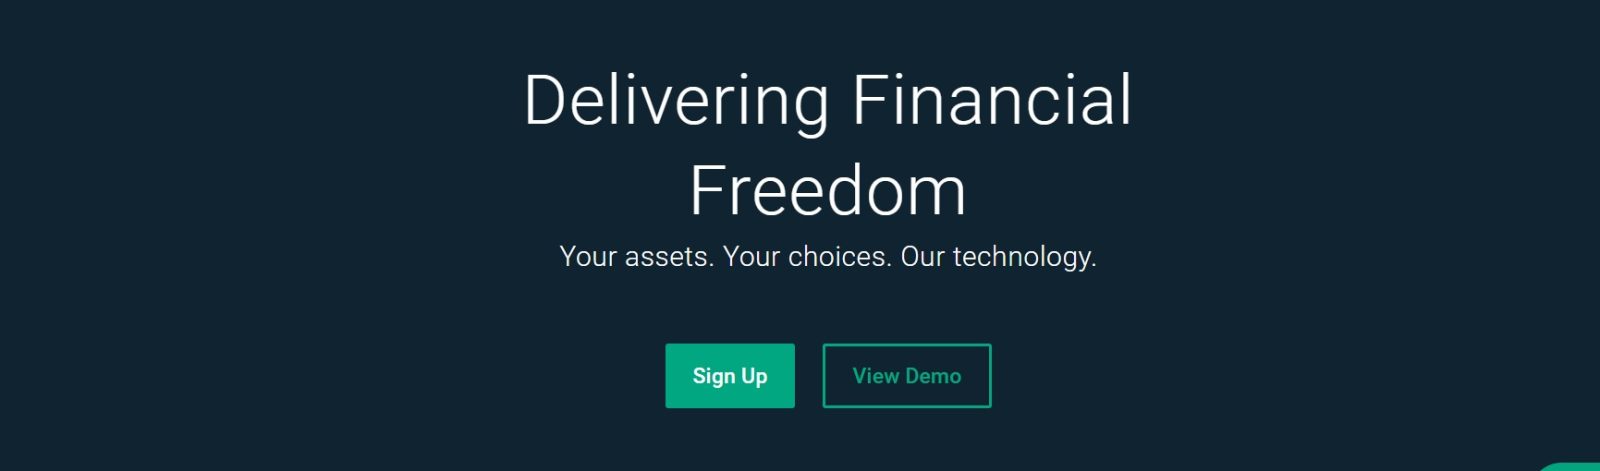 Bitfinex Cryptocurrency Exchange Review : Pros & Cons